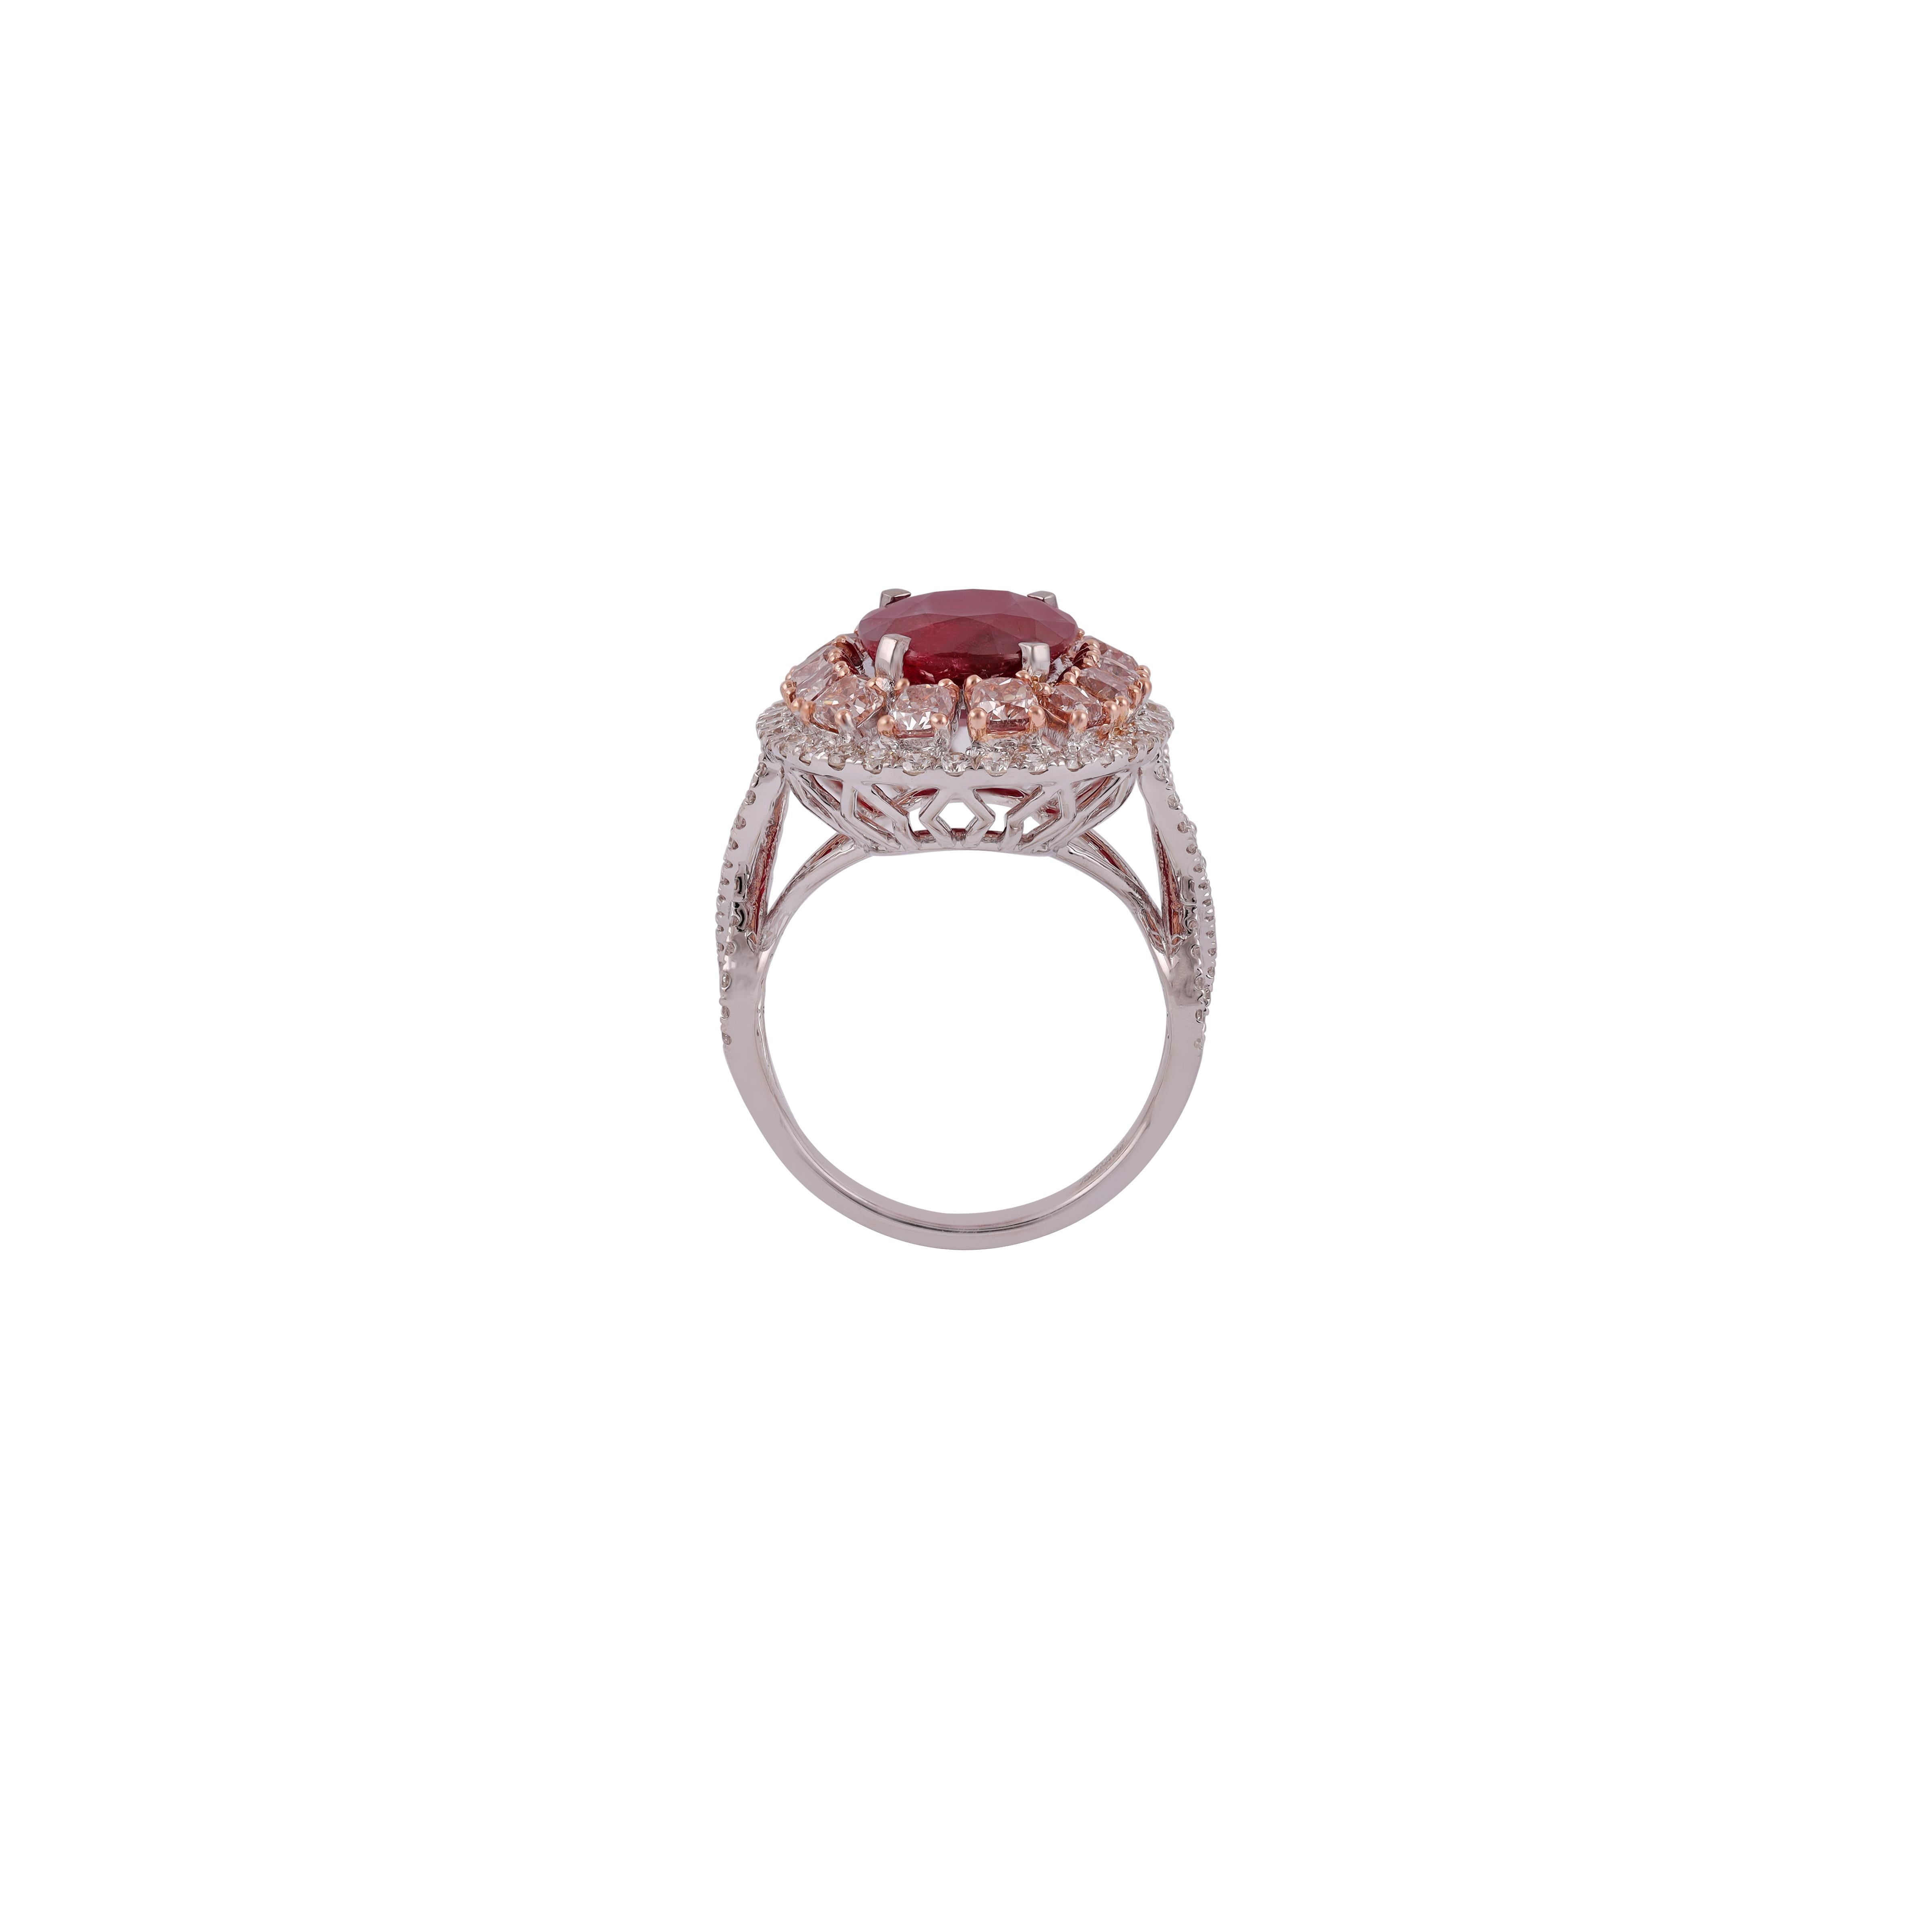 Contemporary 5.91 Cts Mozambique Ruby and Pink Diamond Classic Ring Set in 18k White Gold For Sale